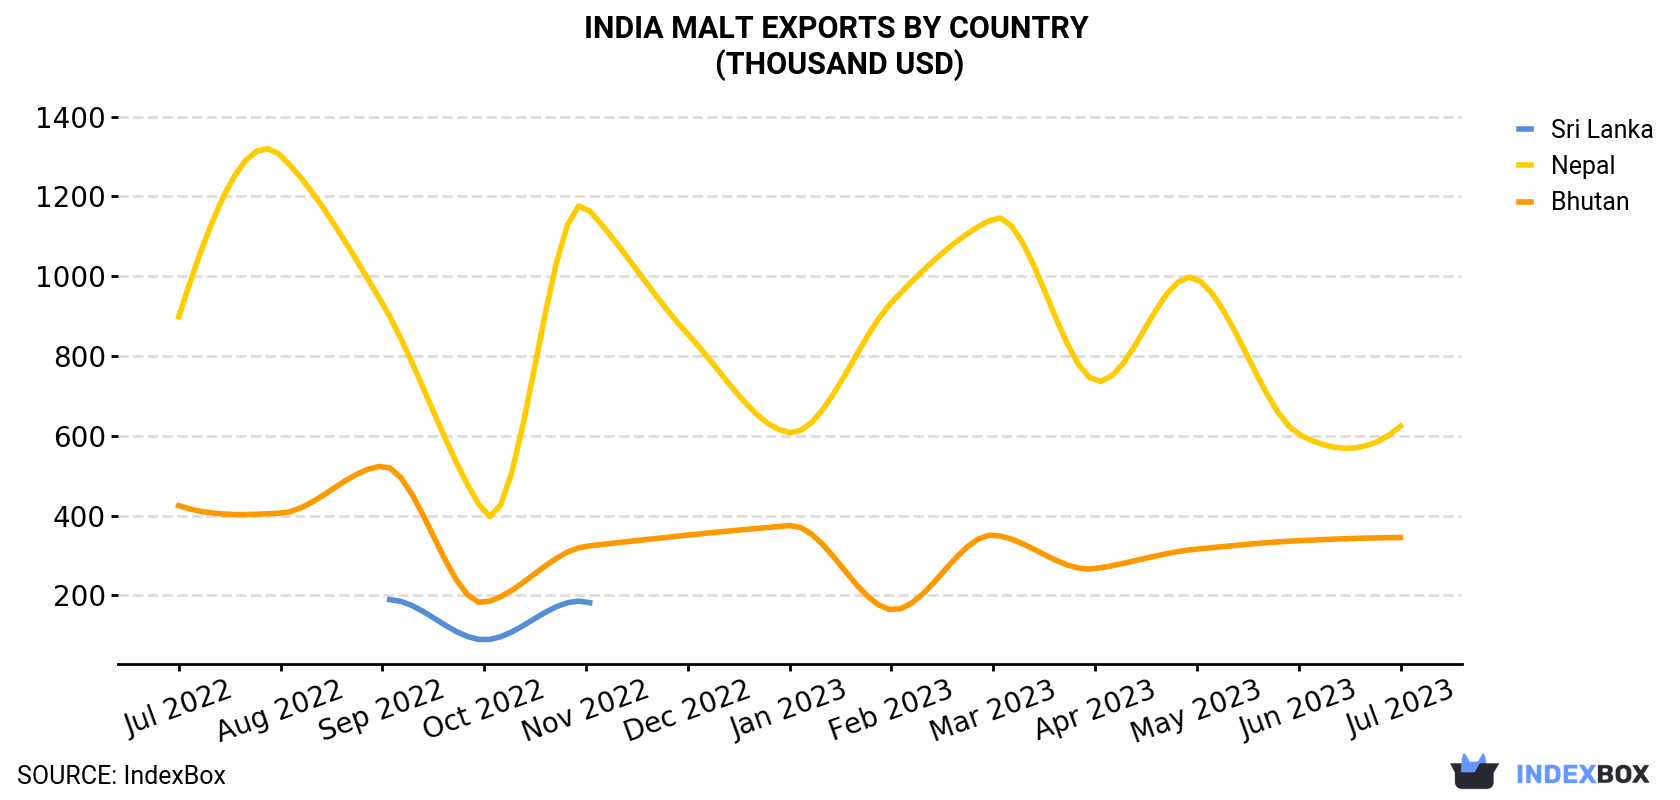 India Malt Exports By Country (Thousand USD)